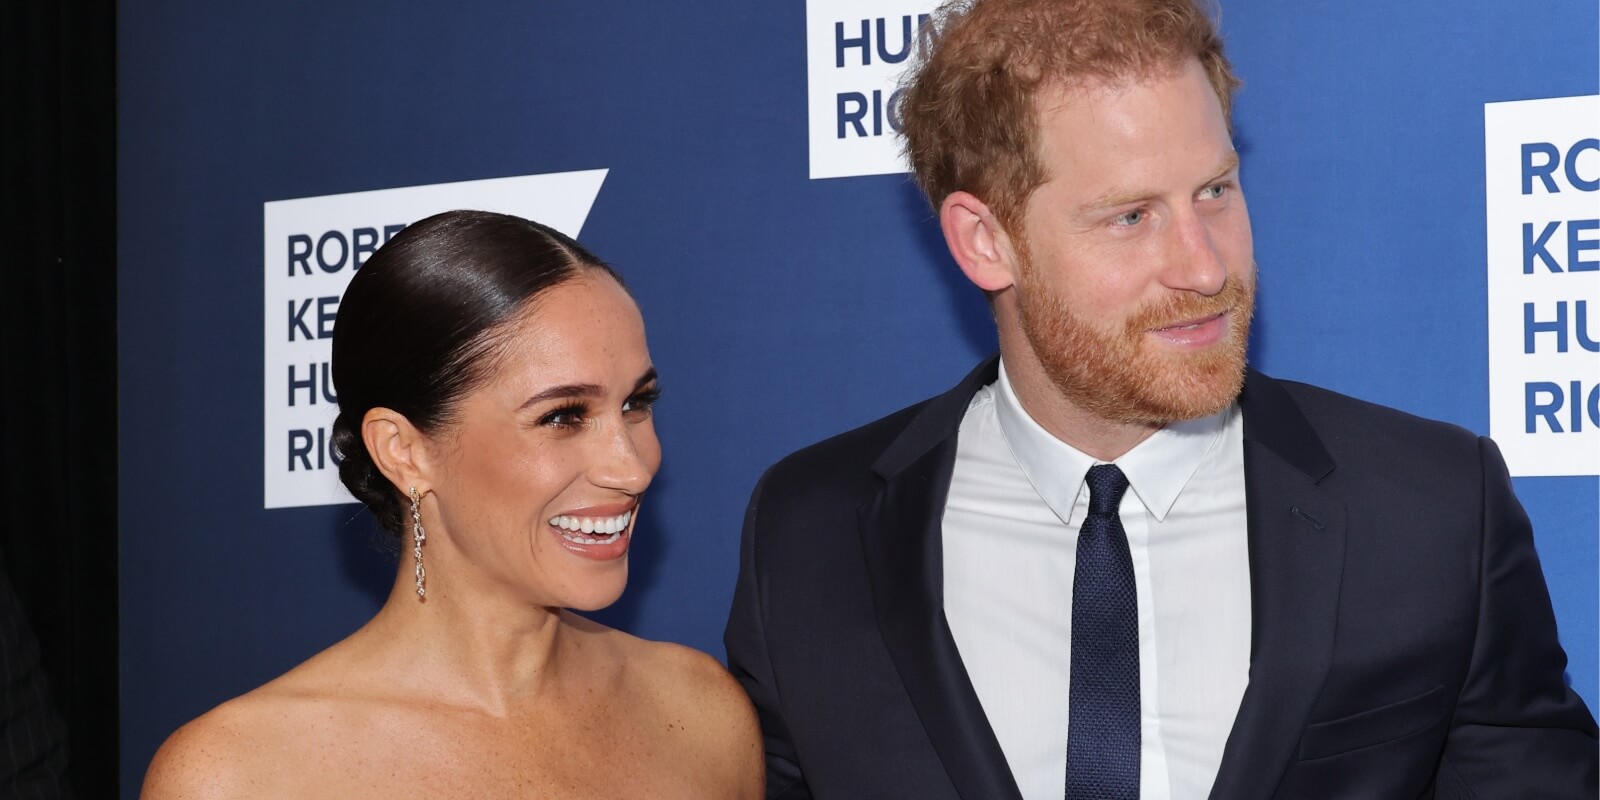 Meghan Markle and Prince Harry attend the 2022 Robert F. Kennedy Human Rights Ripple of Hope Gala at New York Hilton.